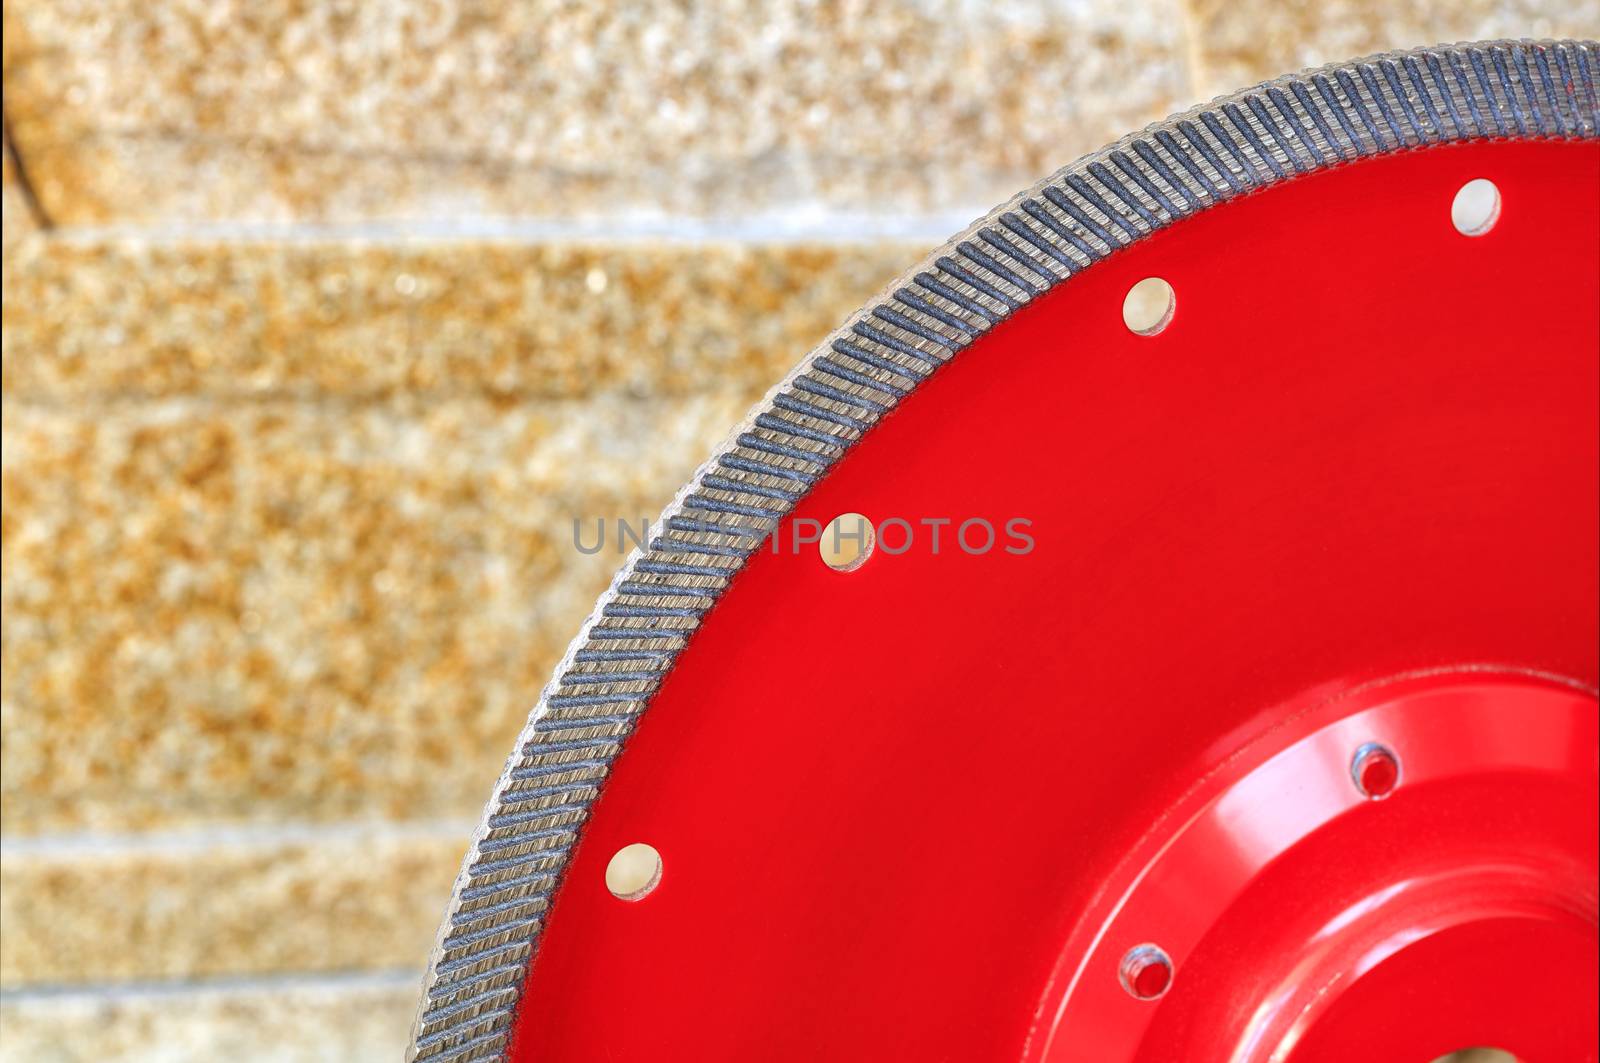 Fragment of a red diamond blade for cutting granite and stone against a background of a wall of golden sandstone. by Sergii